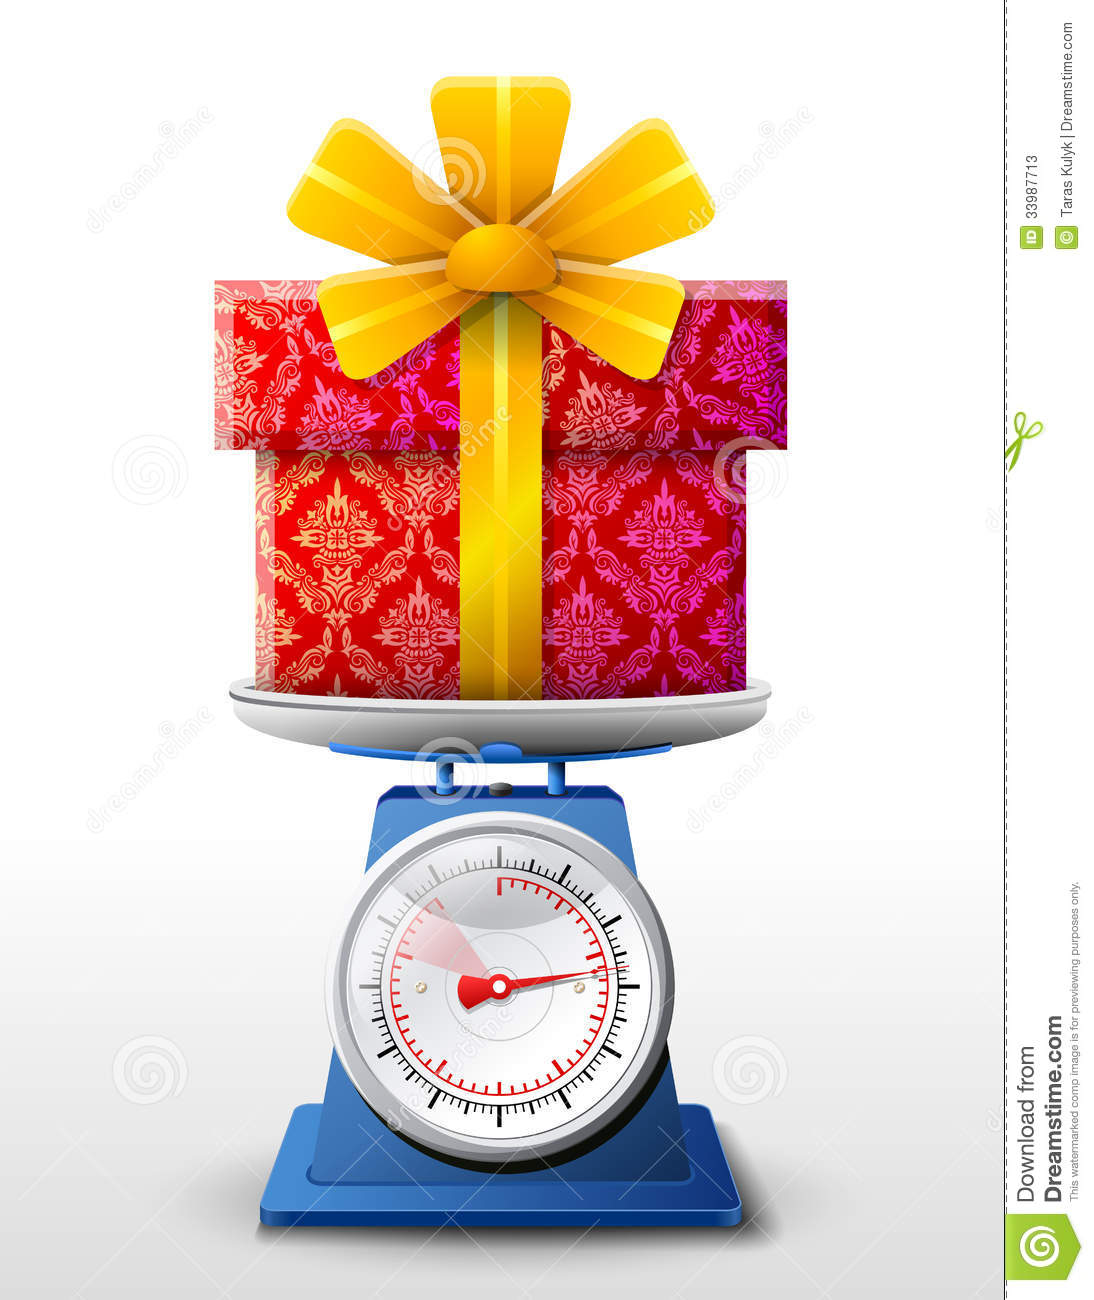 Weighing Gift Box On Scales  Qualitative Vector  Eps 10  Illustration